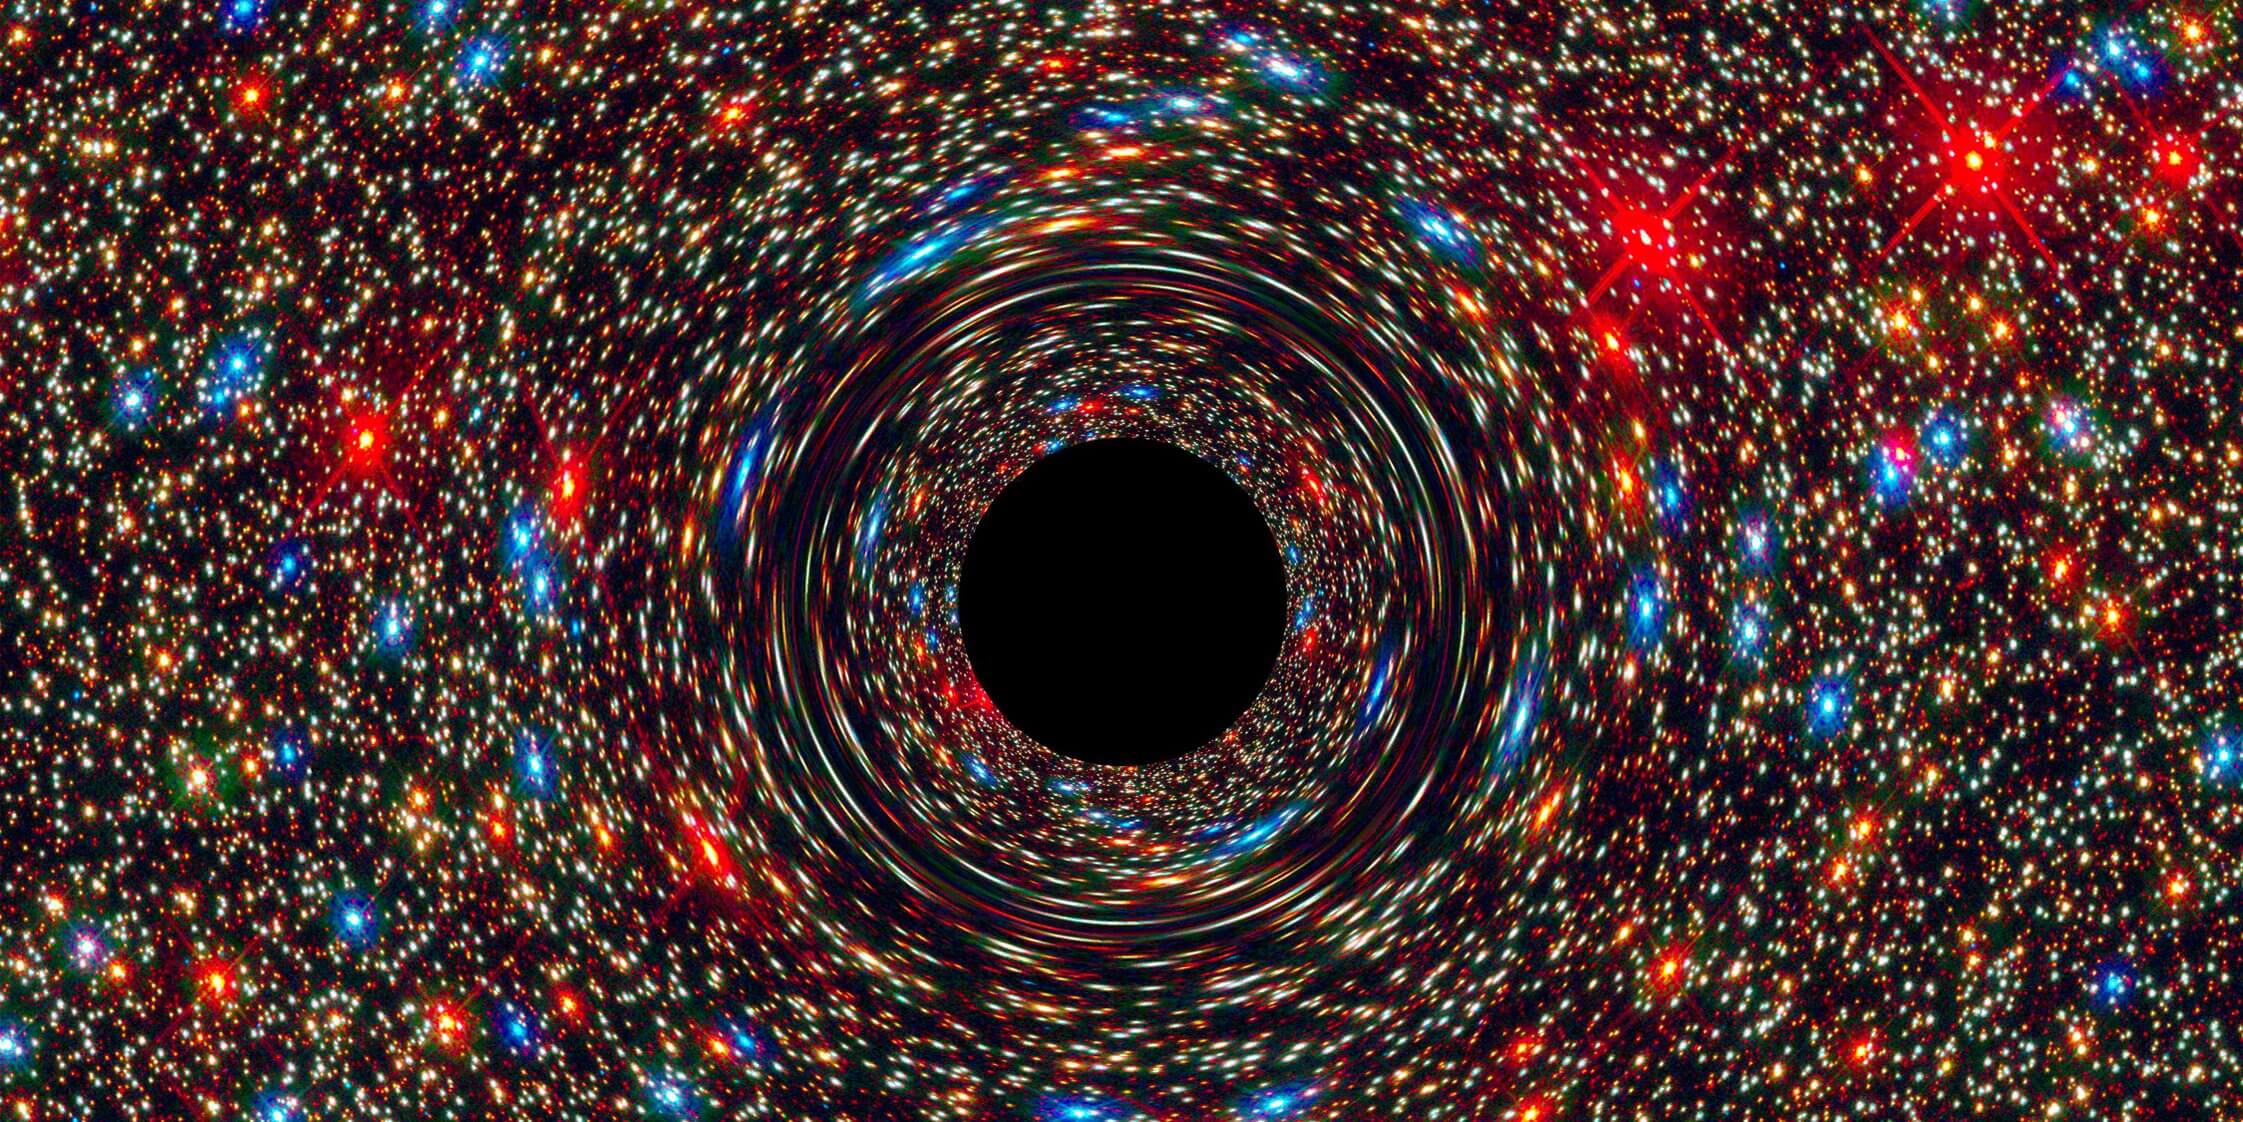 Discovered in our galaxy a black hole that should not exist